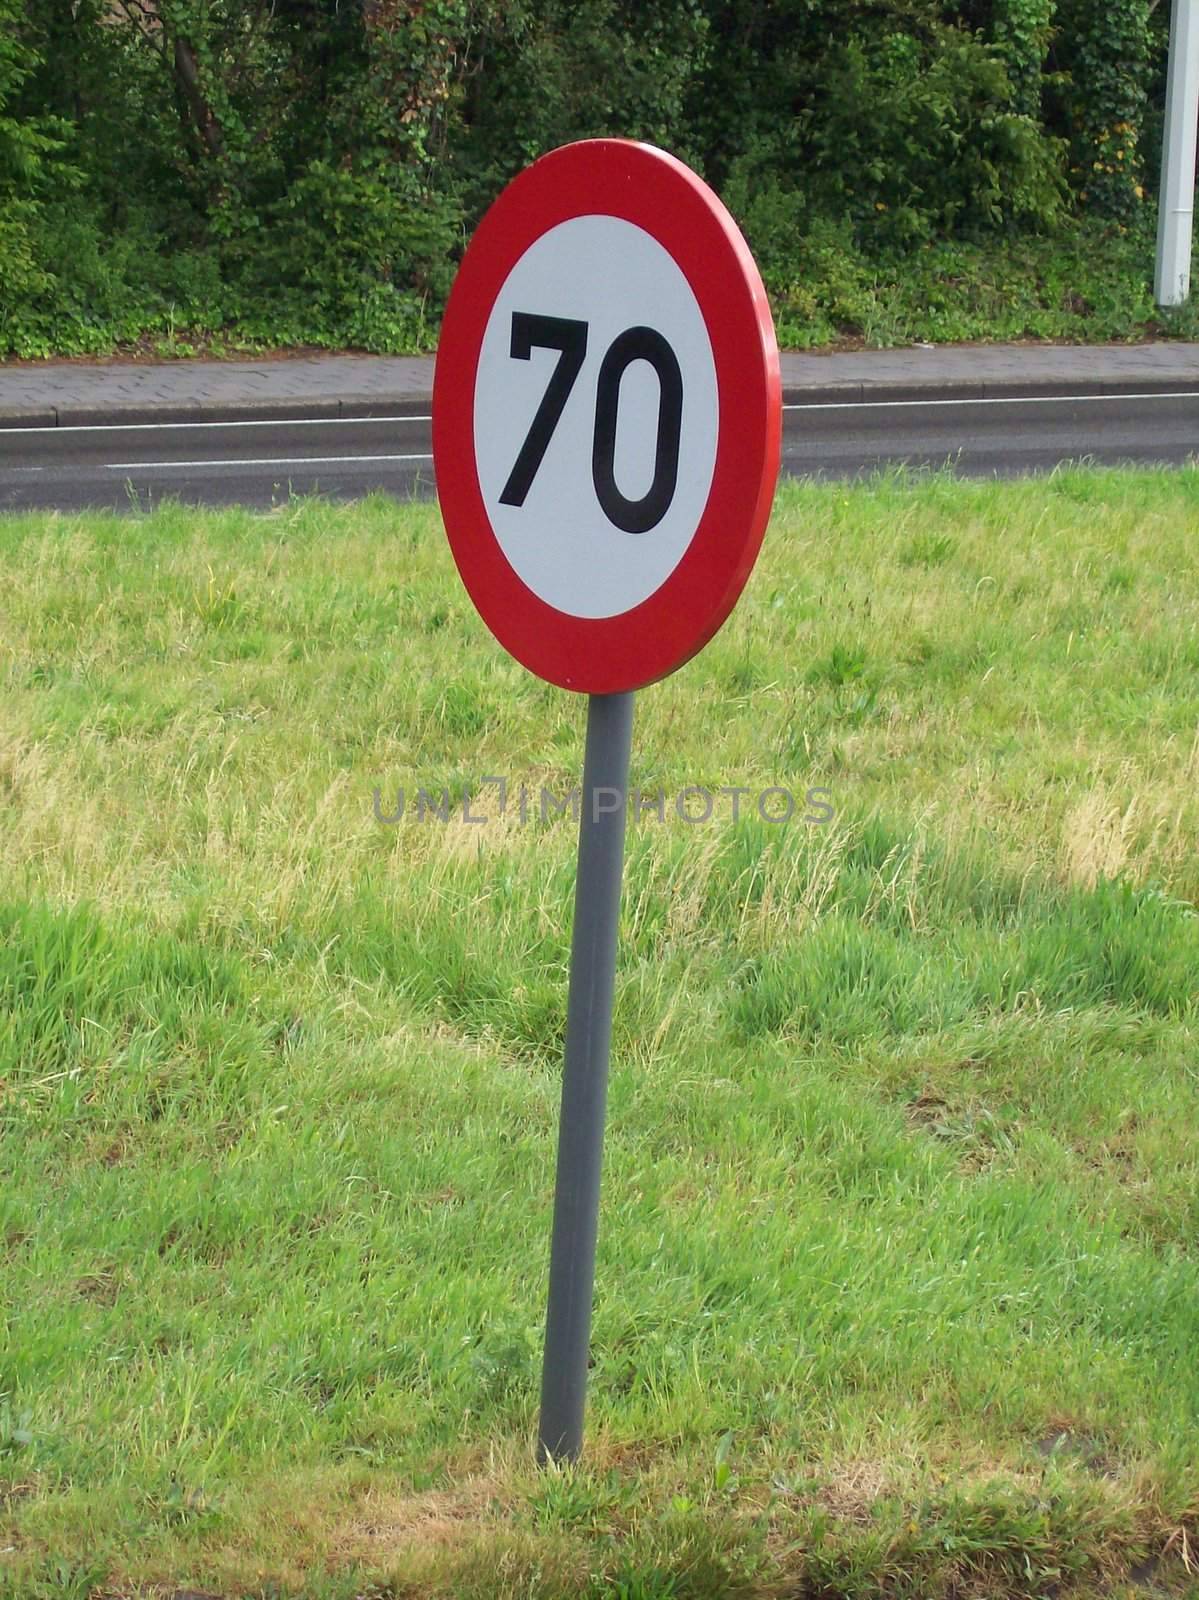 Photo of a road sign